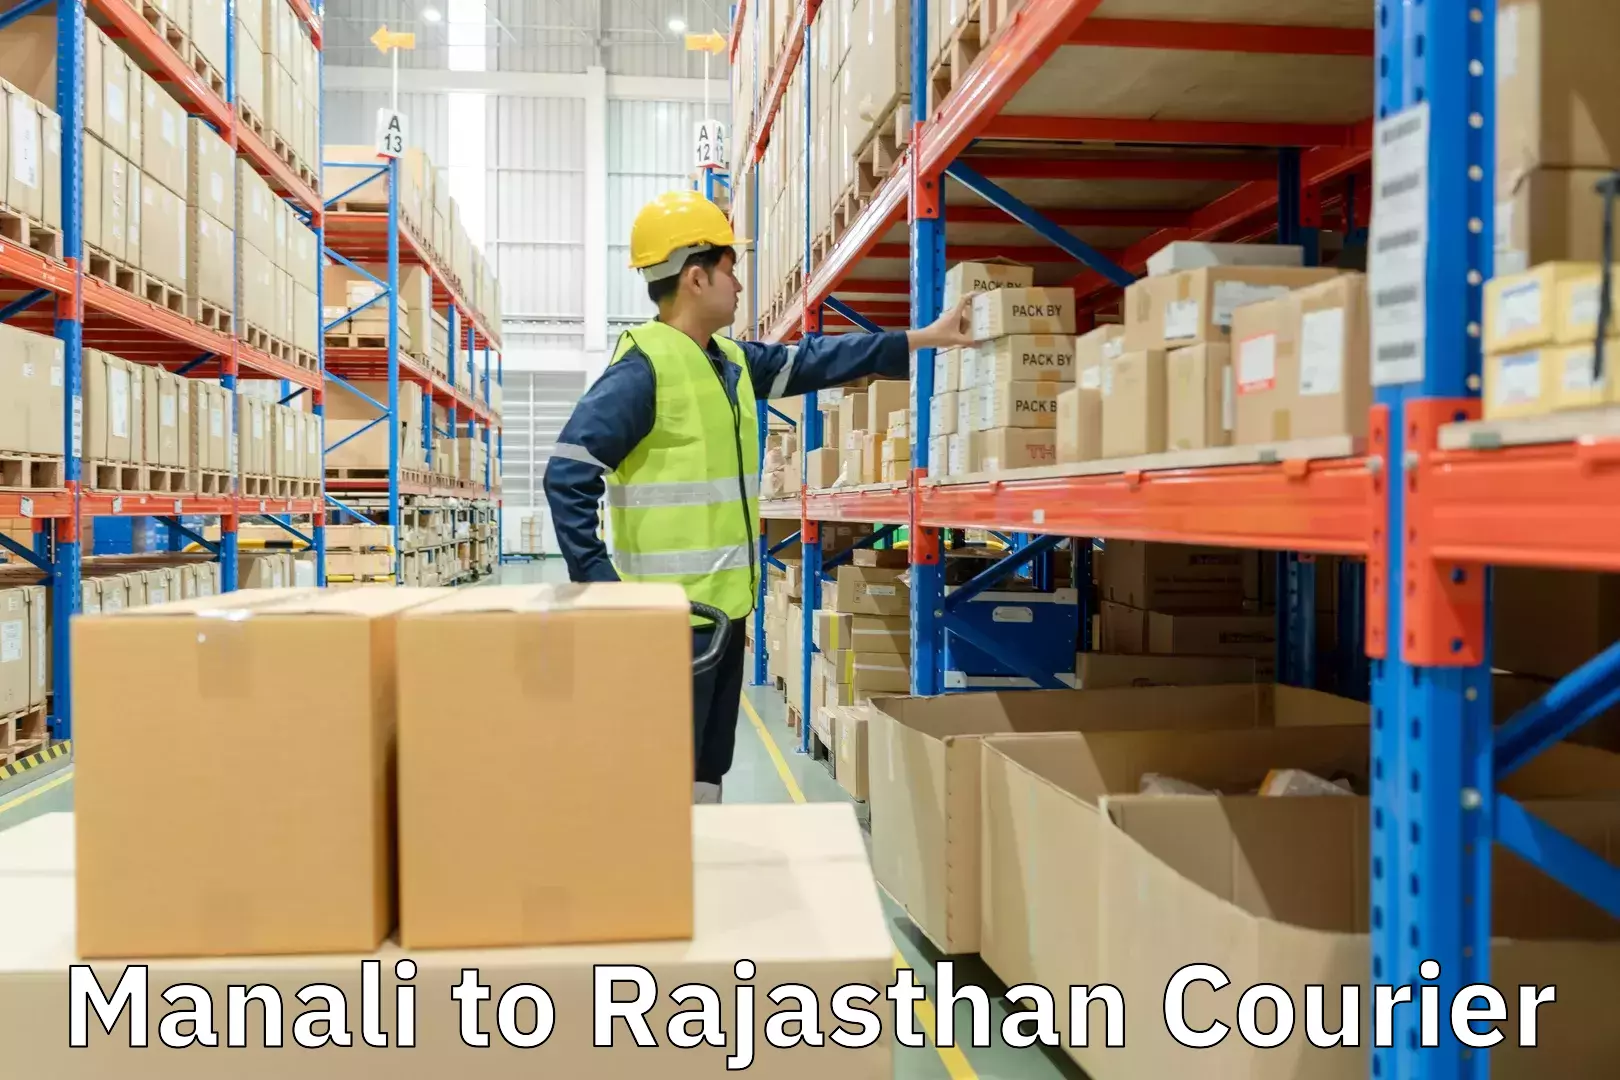 User-friendly delivery service Manali to Rajasthan